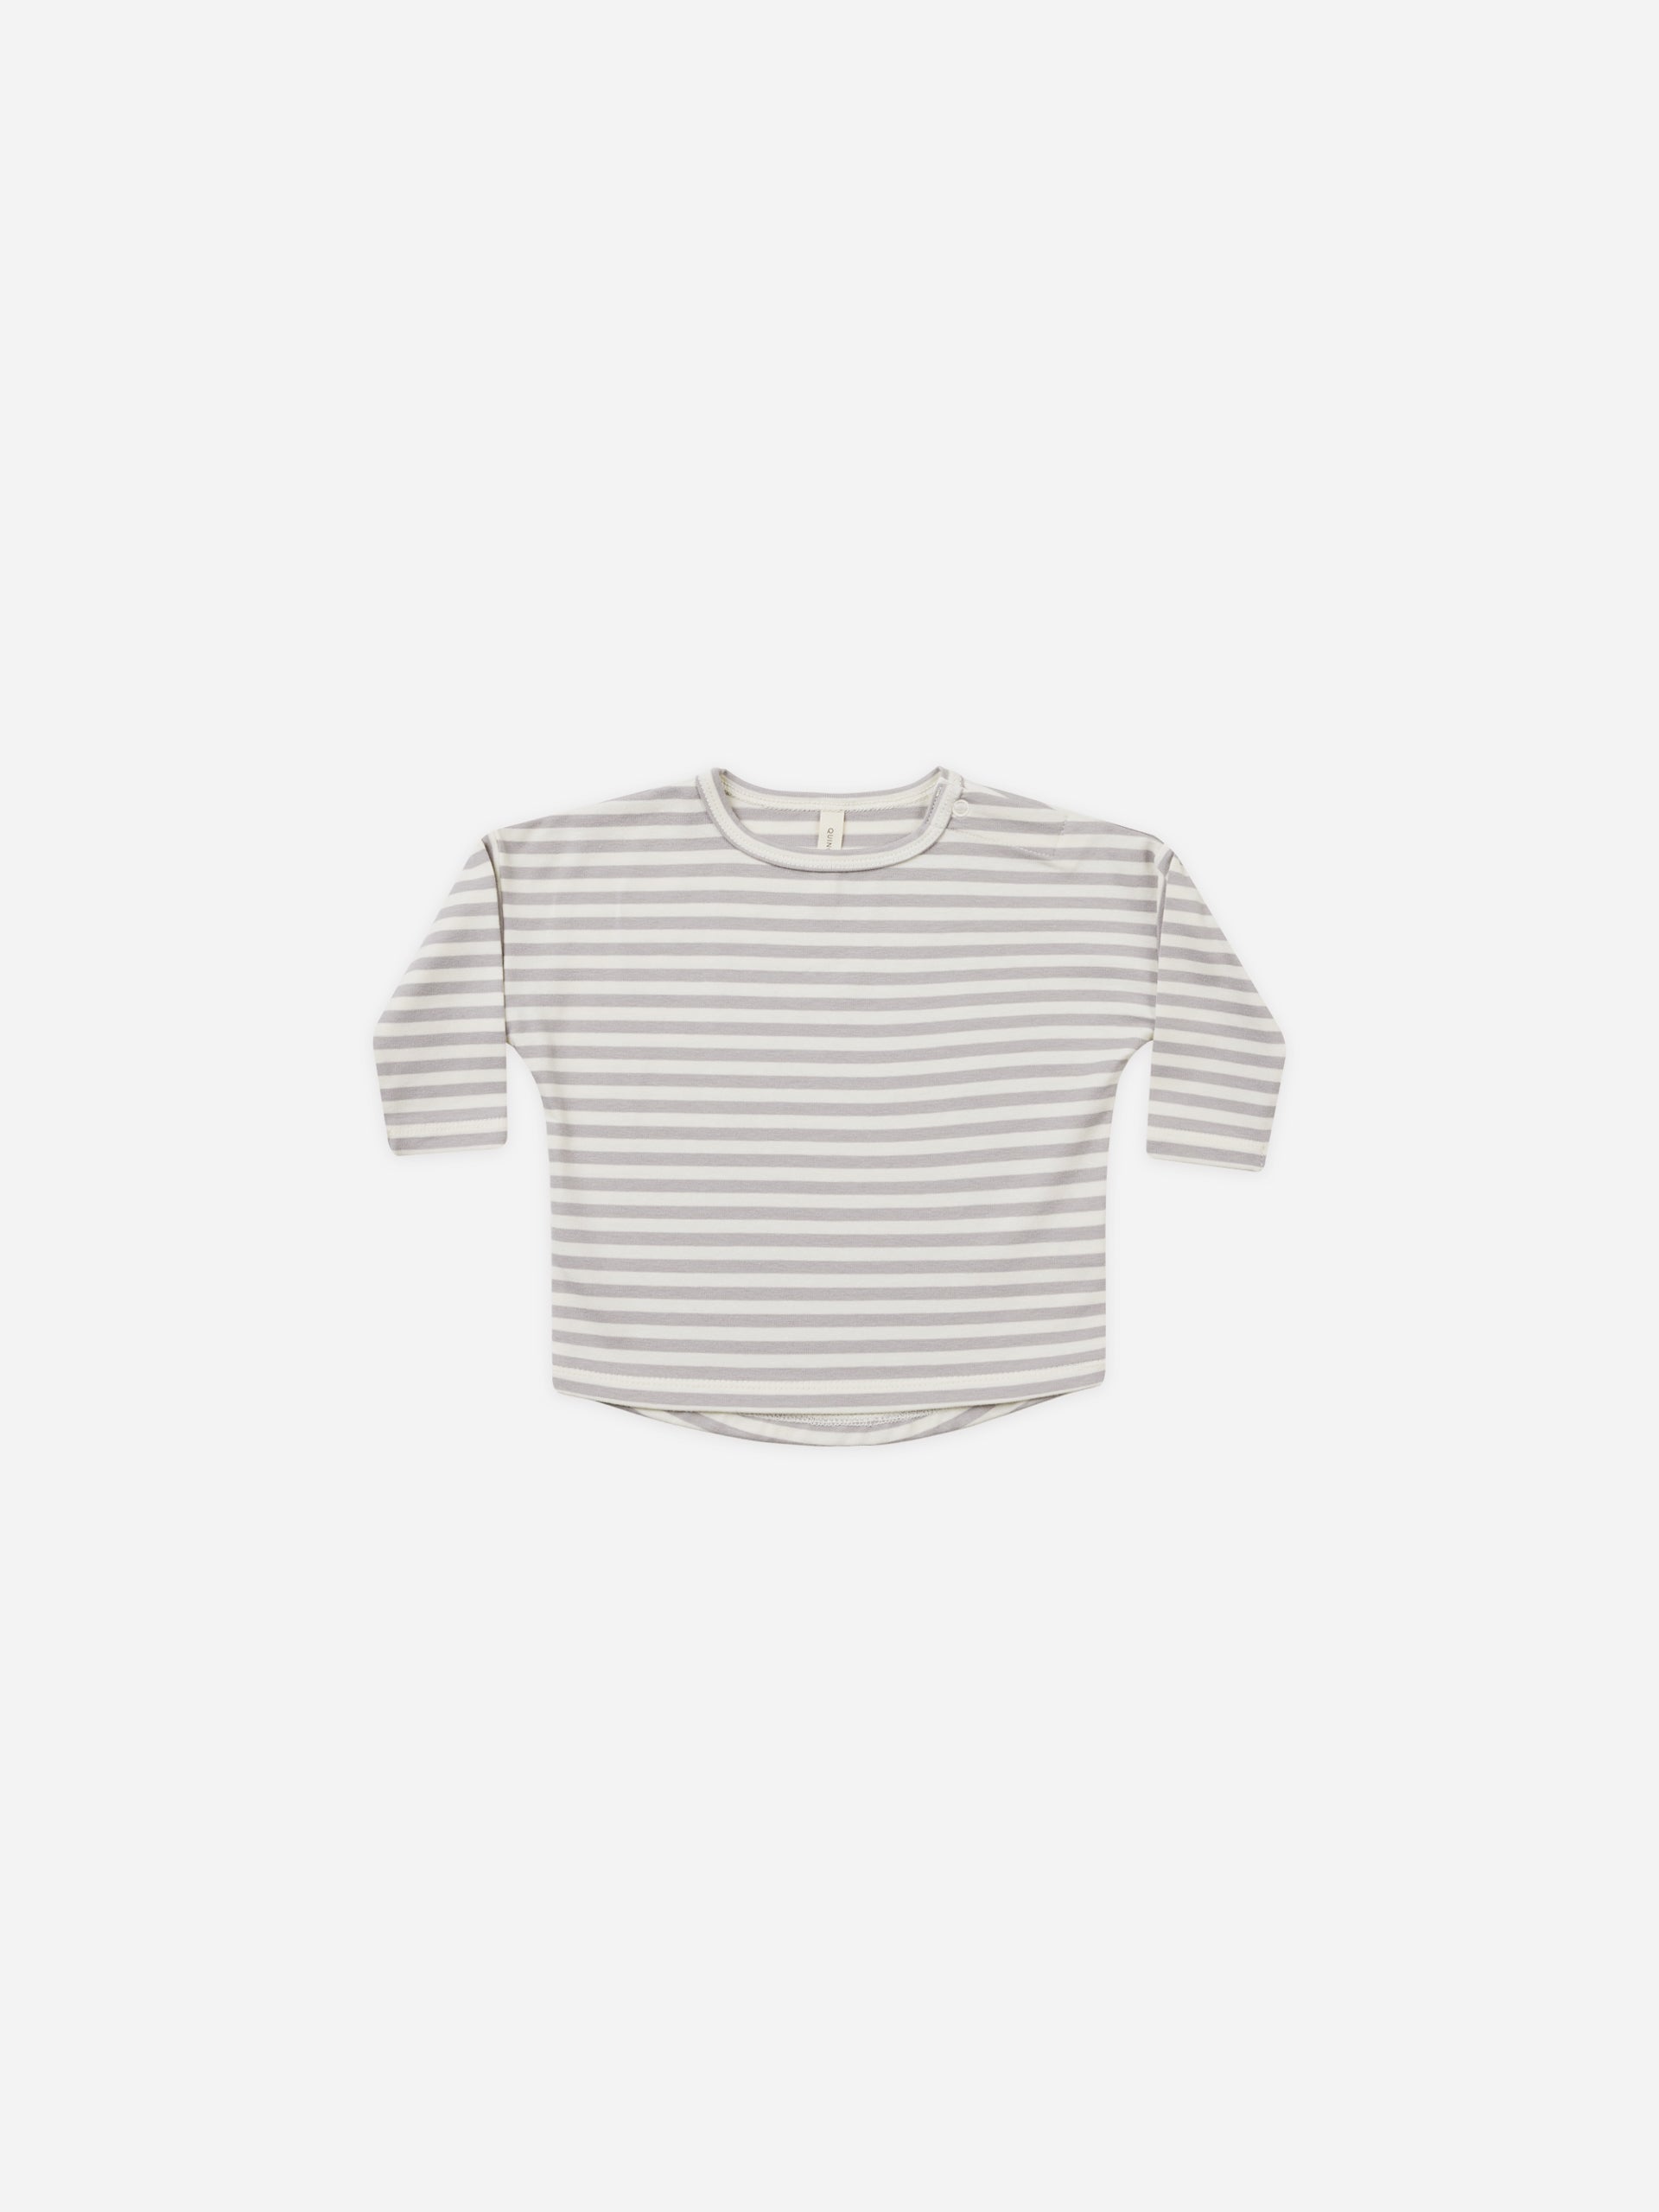 Long Sleeve Tee || Periwinkle Stripe - Rylee + Cru | Kids Clothes | Trendy Baby Clothes | Modern Infant Outfits |